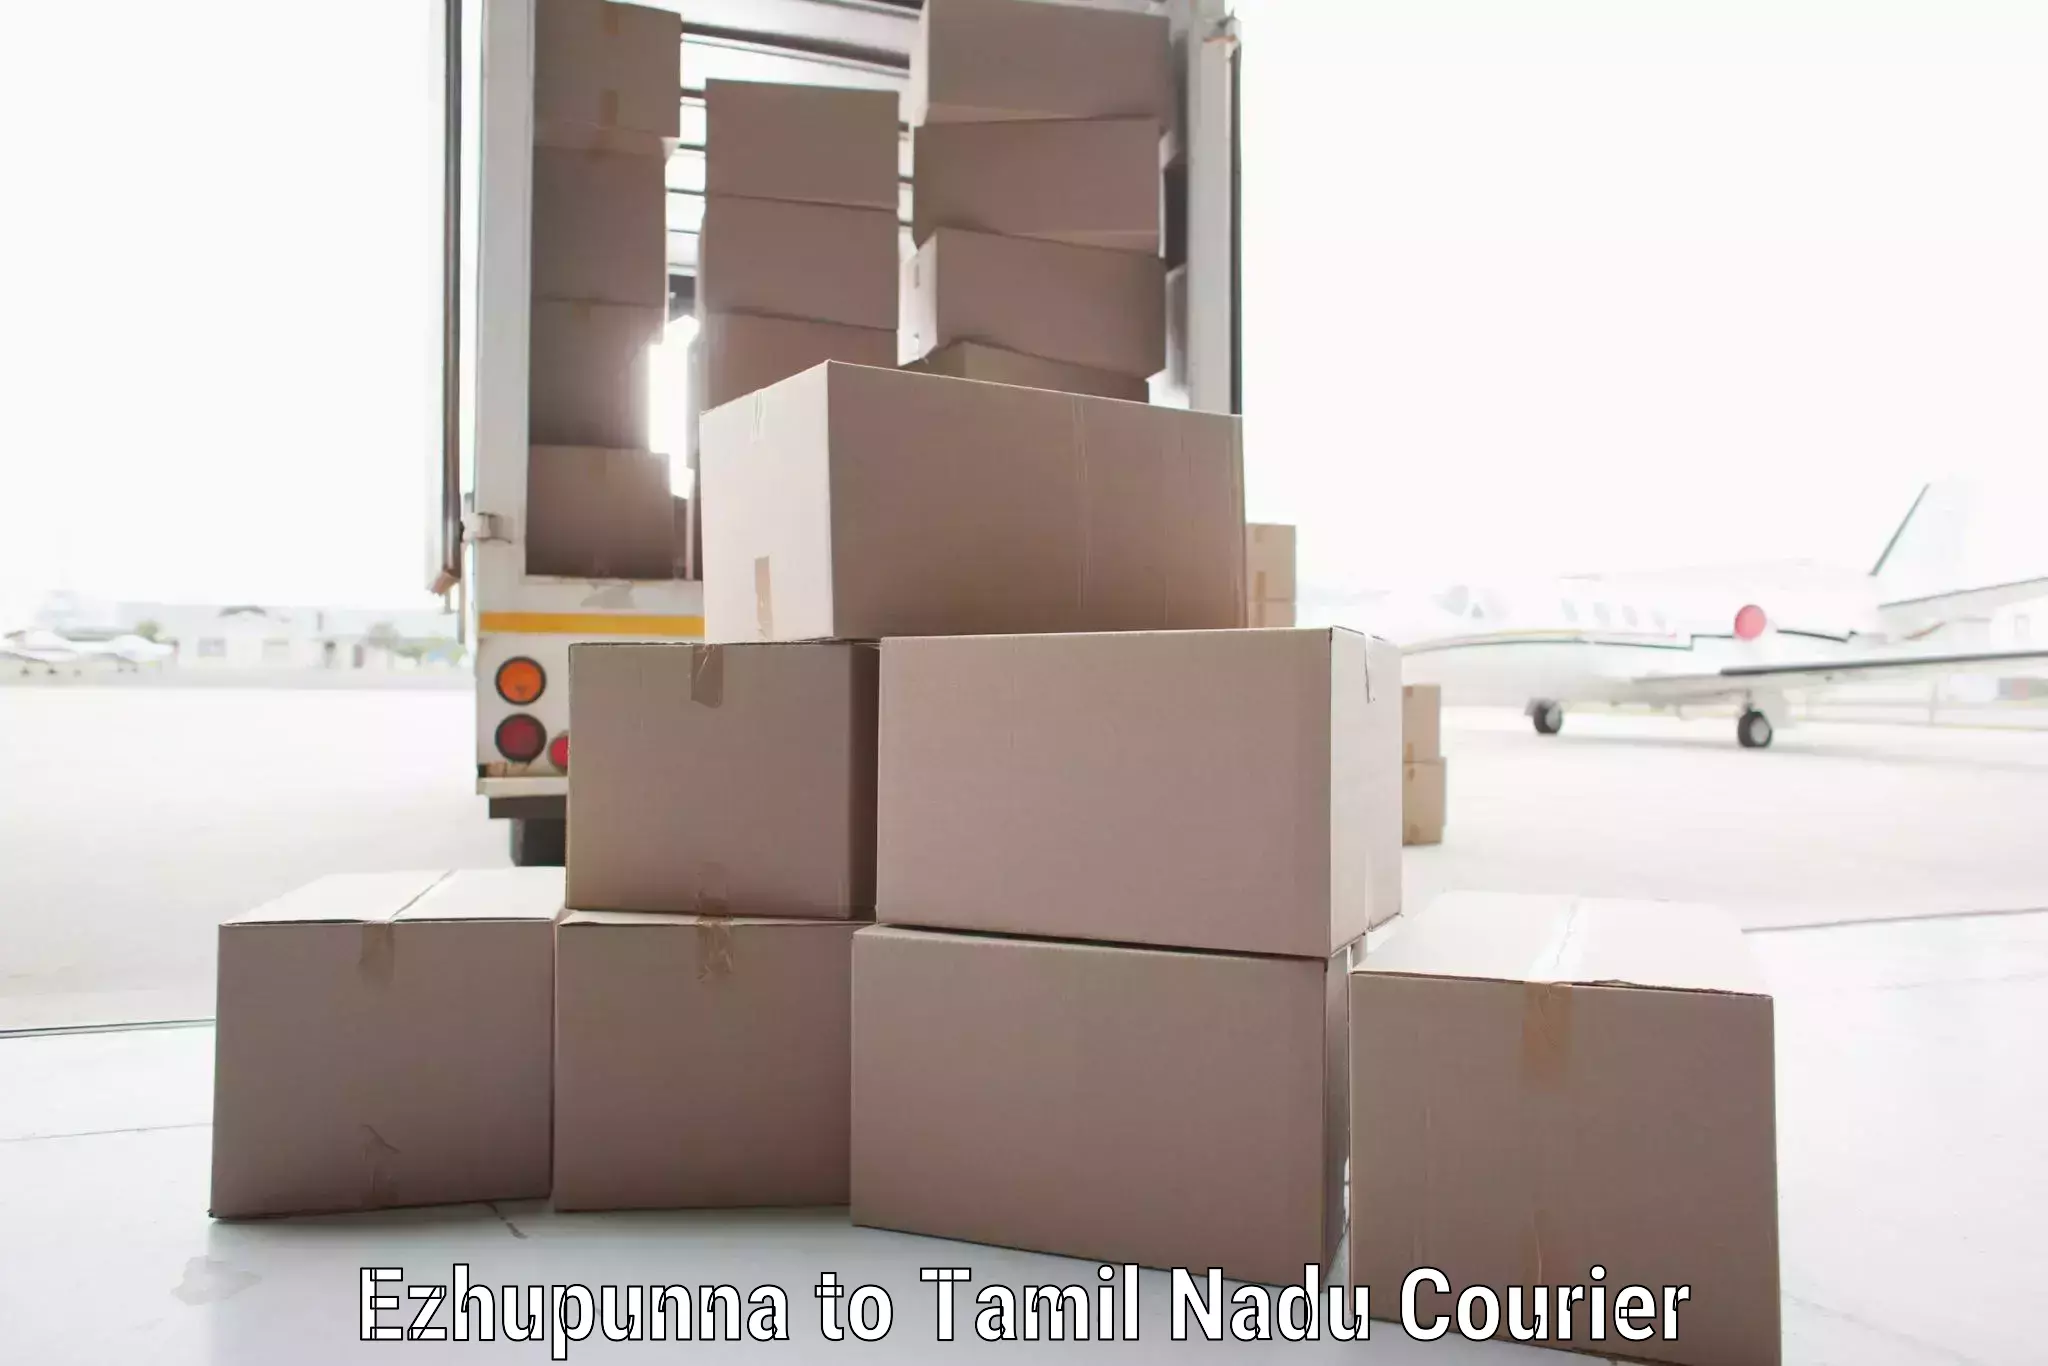 Large-scale shipping solutions Ezhupunna to Tamil Nadu